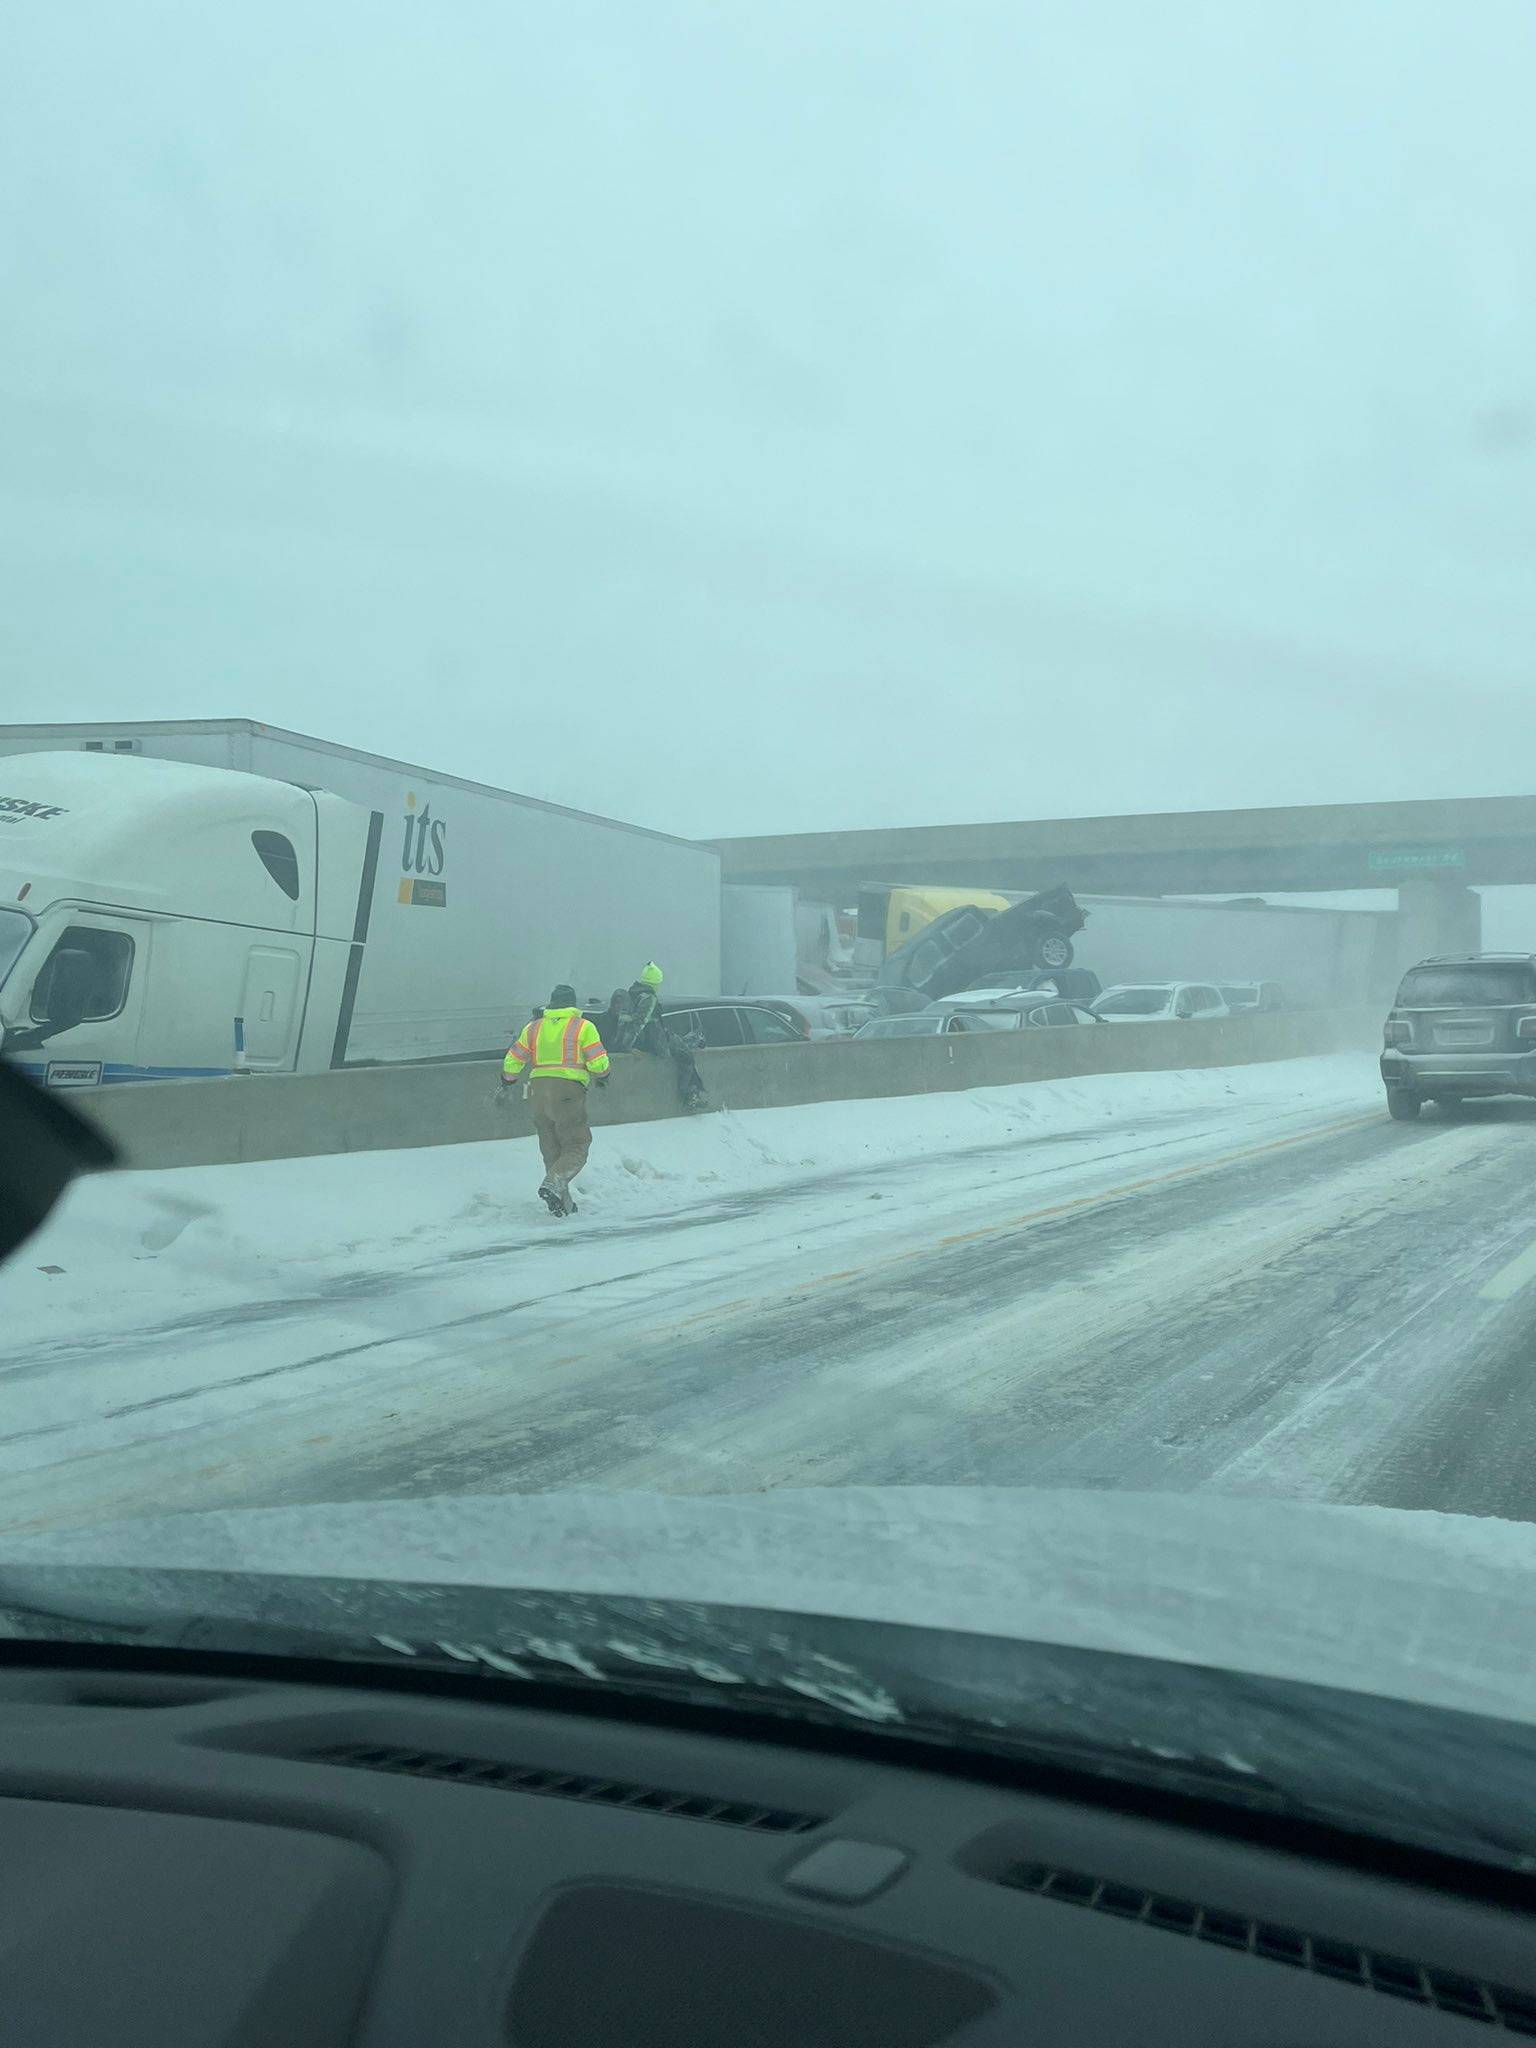 Ohio Turnpike is seen closed in both directions after a massive pileup blocked traffic near Sandusky amid a severe winter storm